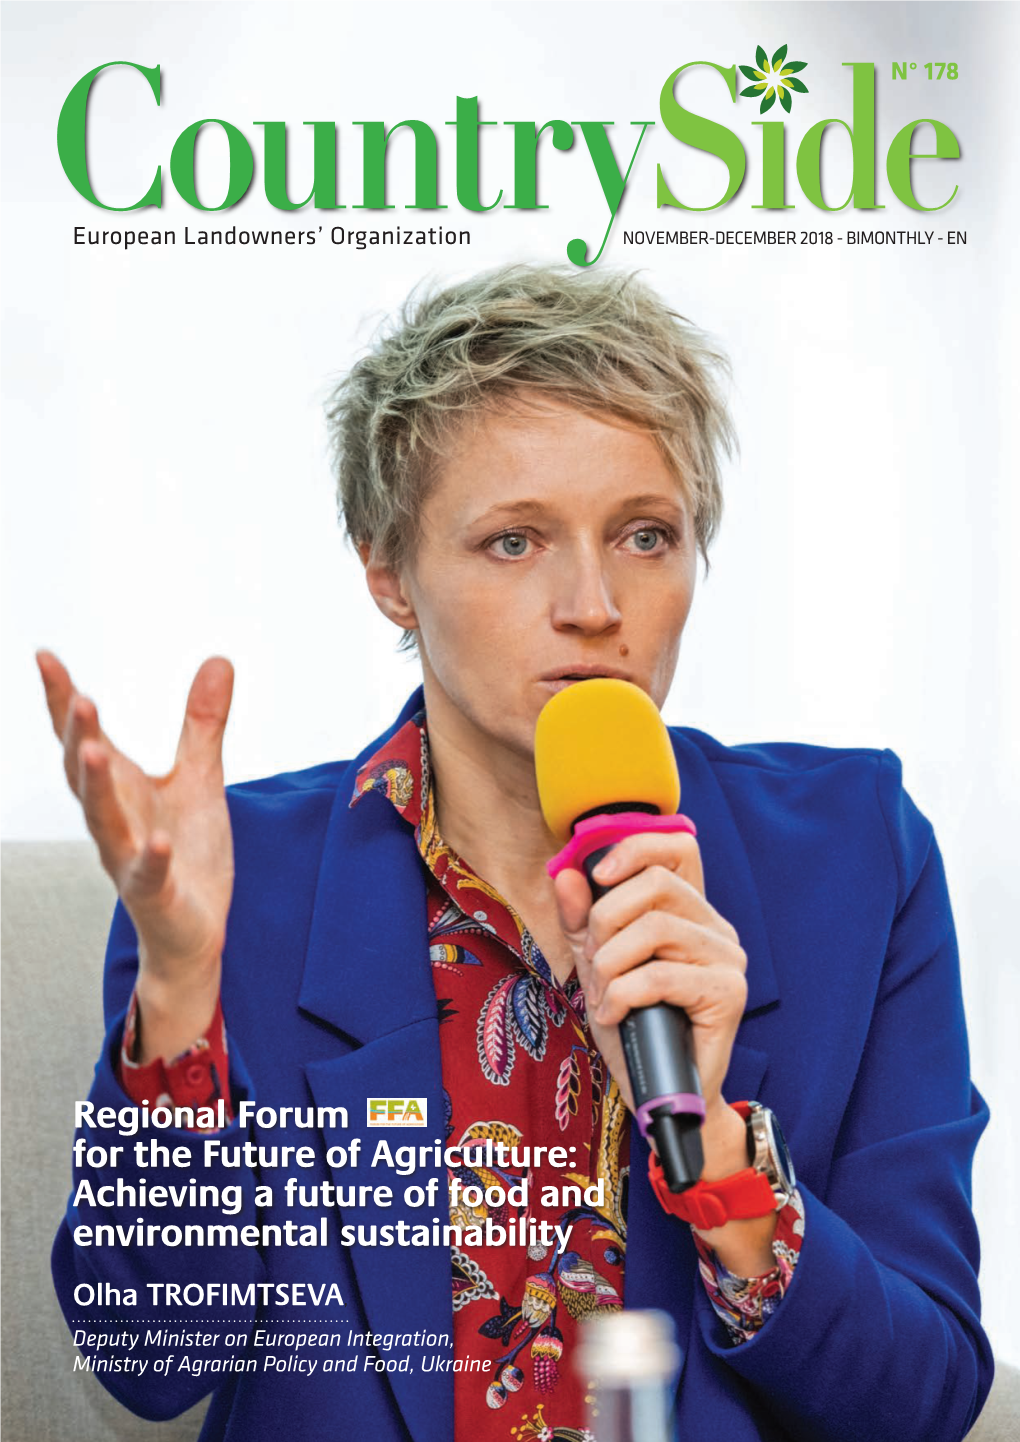 Regional Forum for the Future of Agriculture: Achieving a Future of Food and Environmental Sustainability